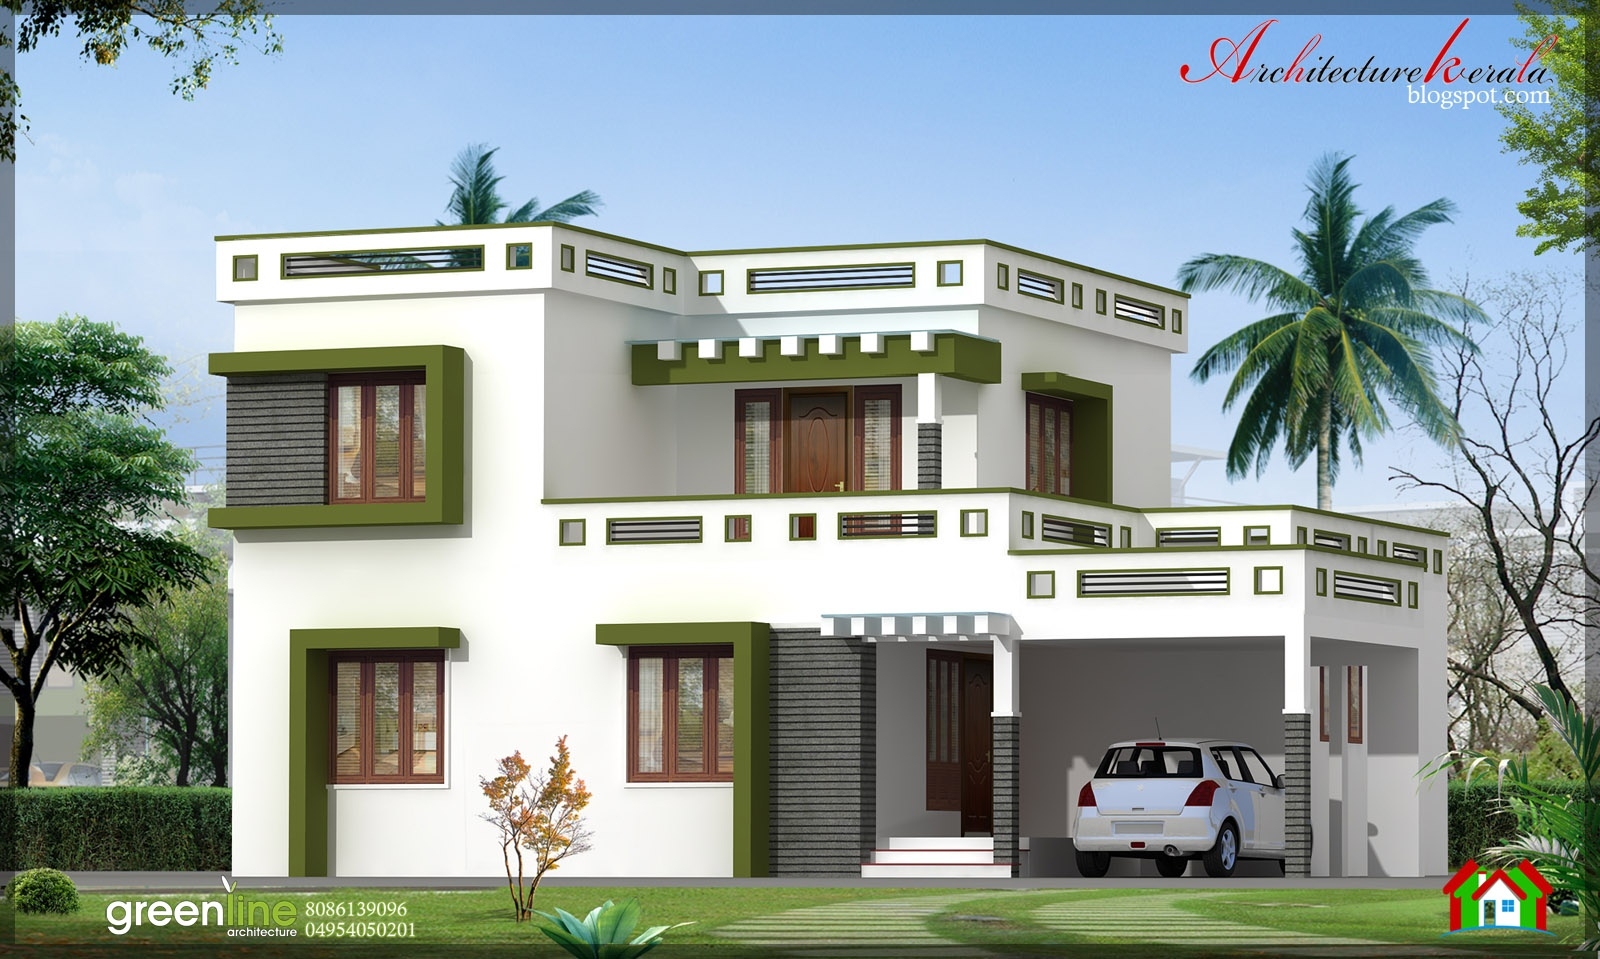 Classy architecture kerala: 3 bhk new modern style kerala home design in 1700 intended for kerala style contemporary homes